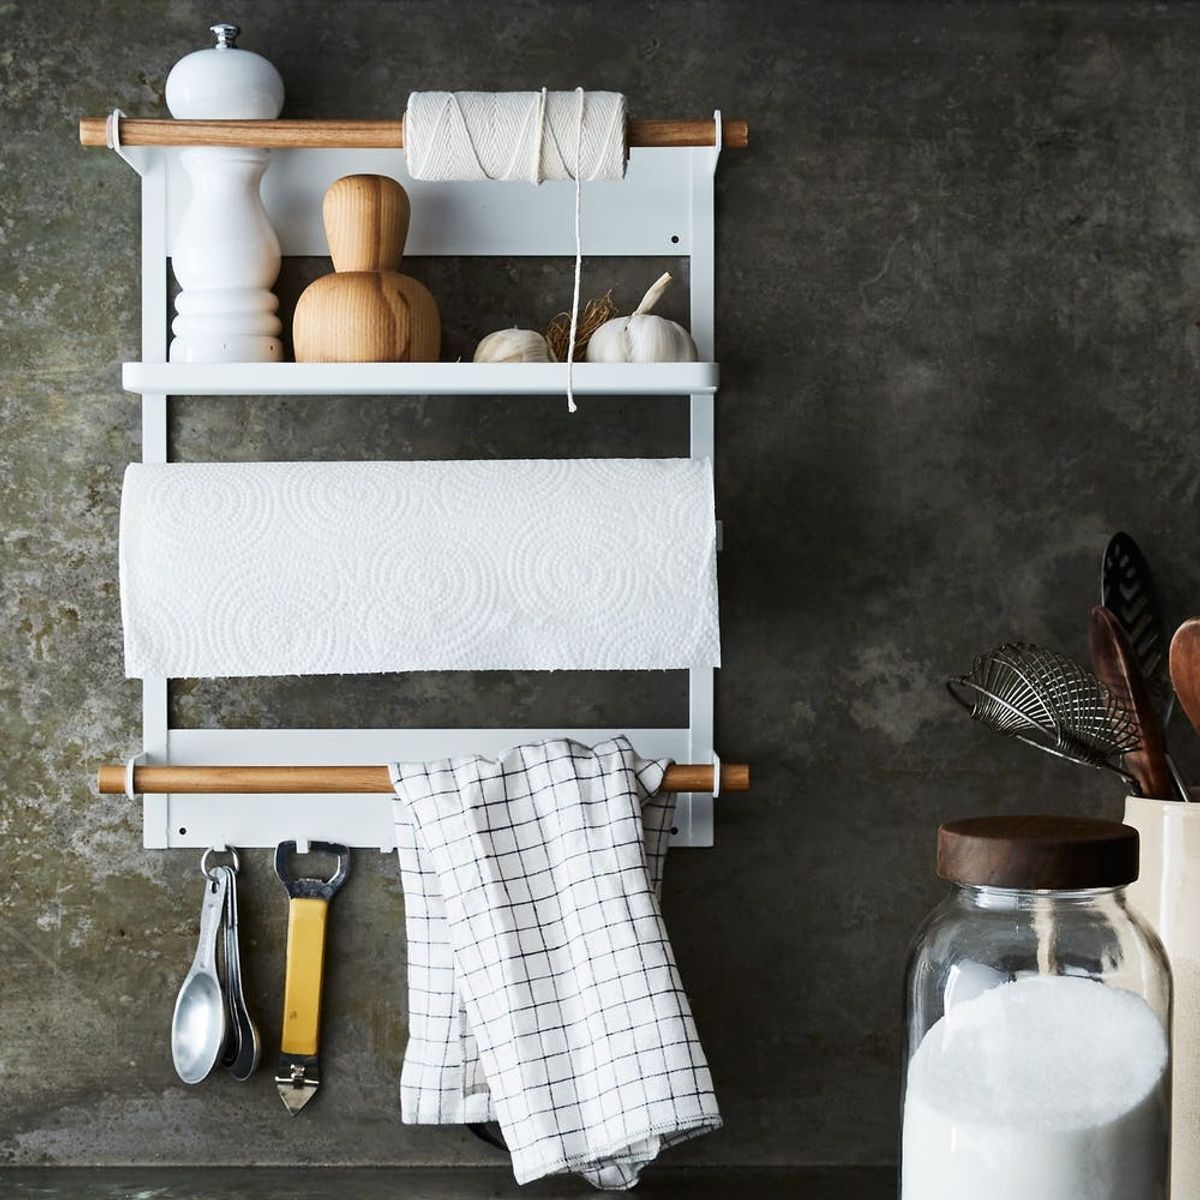 The Space-Doubling Kitchen Storage That Takes One Second to Install